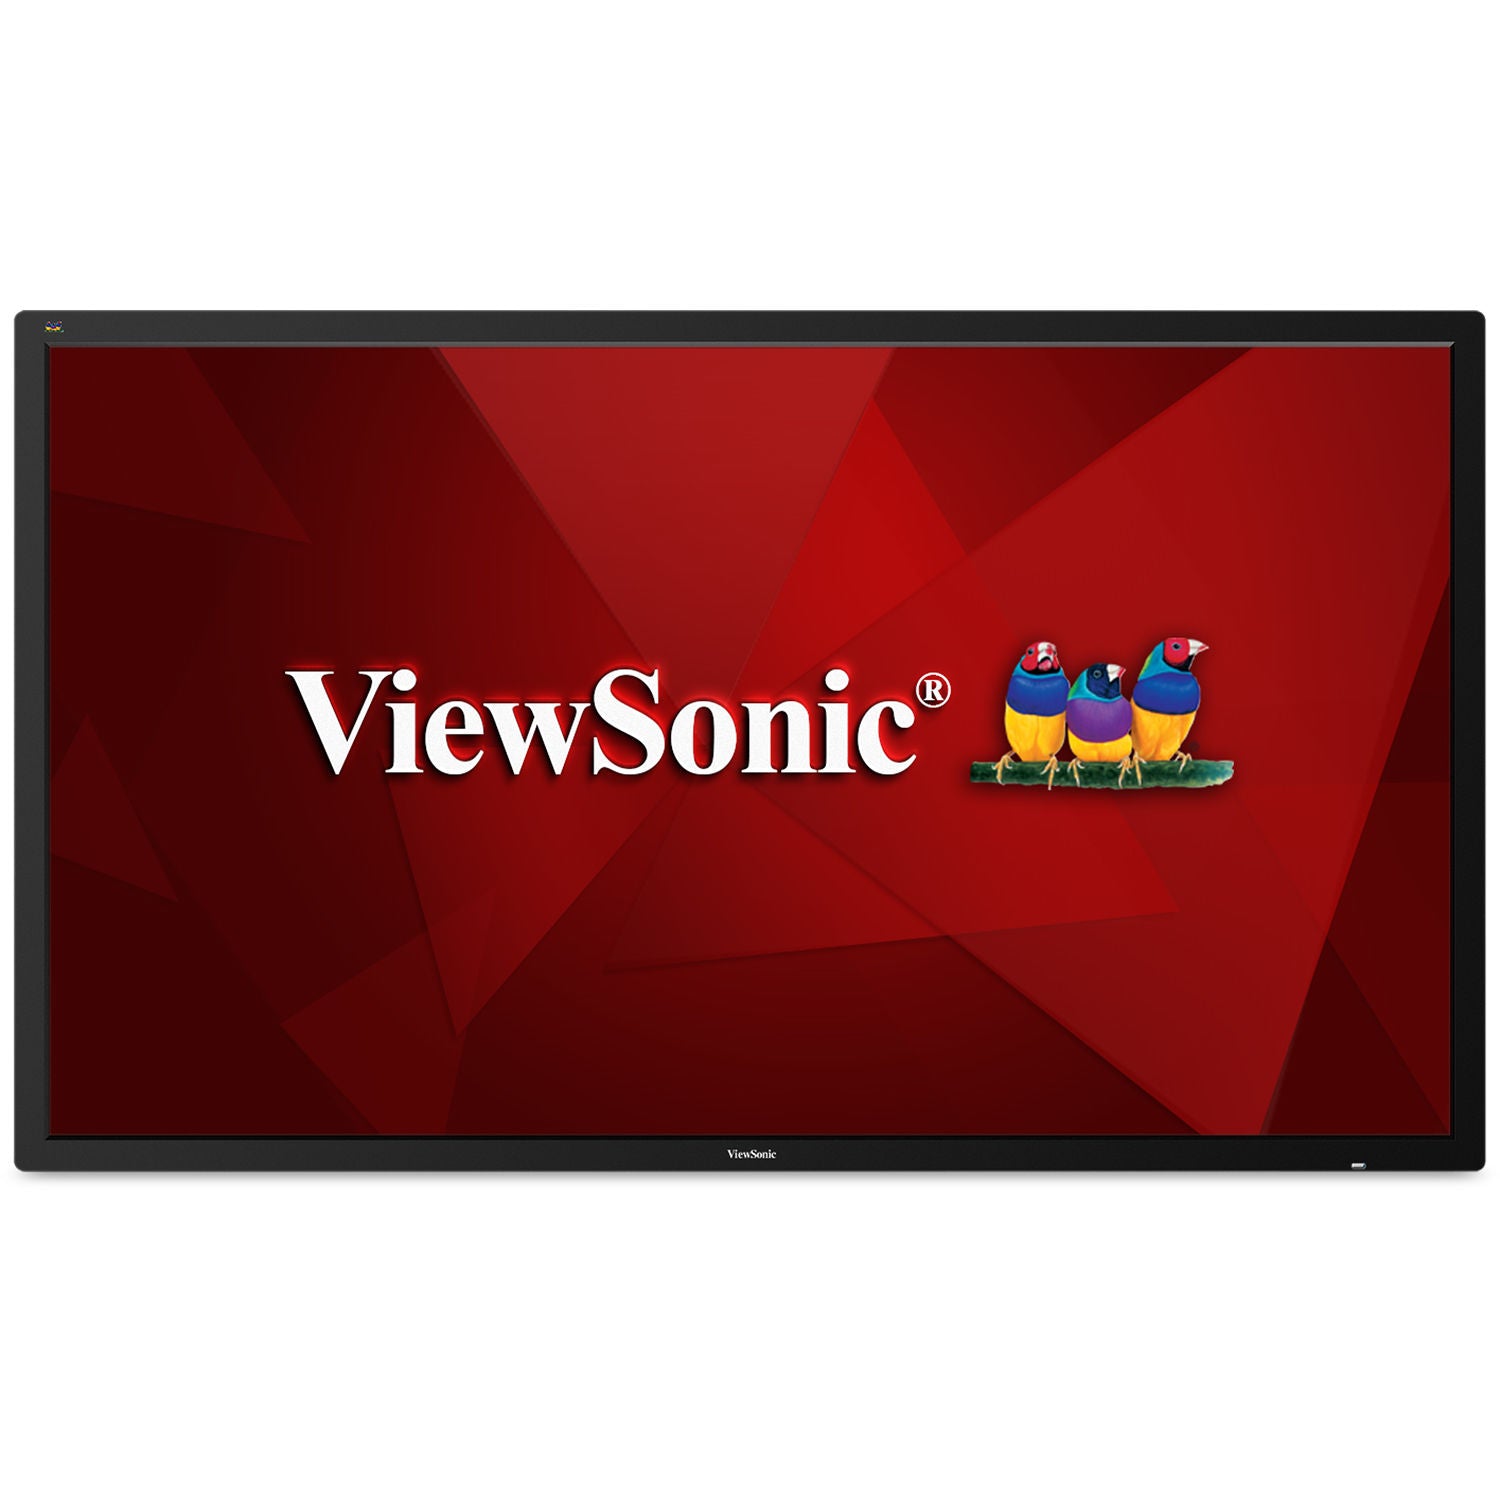 ViewSonic CDE8600-R 86" 16:9 4K Ultra HD Commercial Display Certified Refurbished